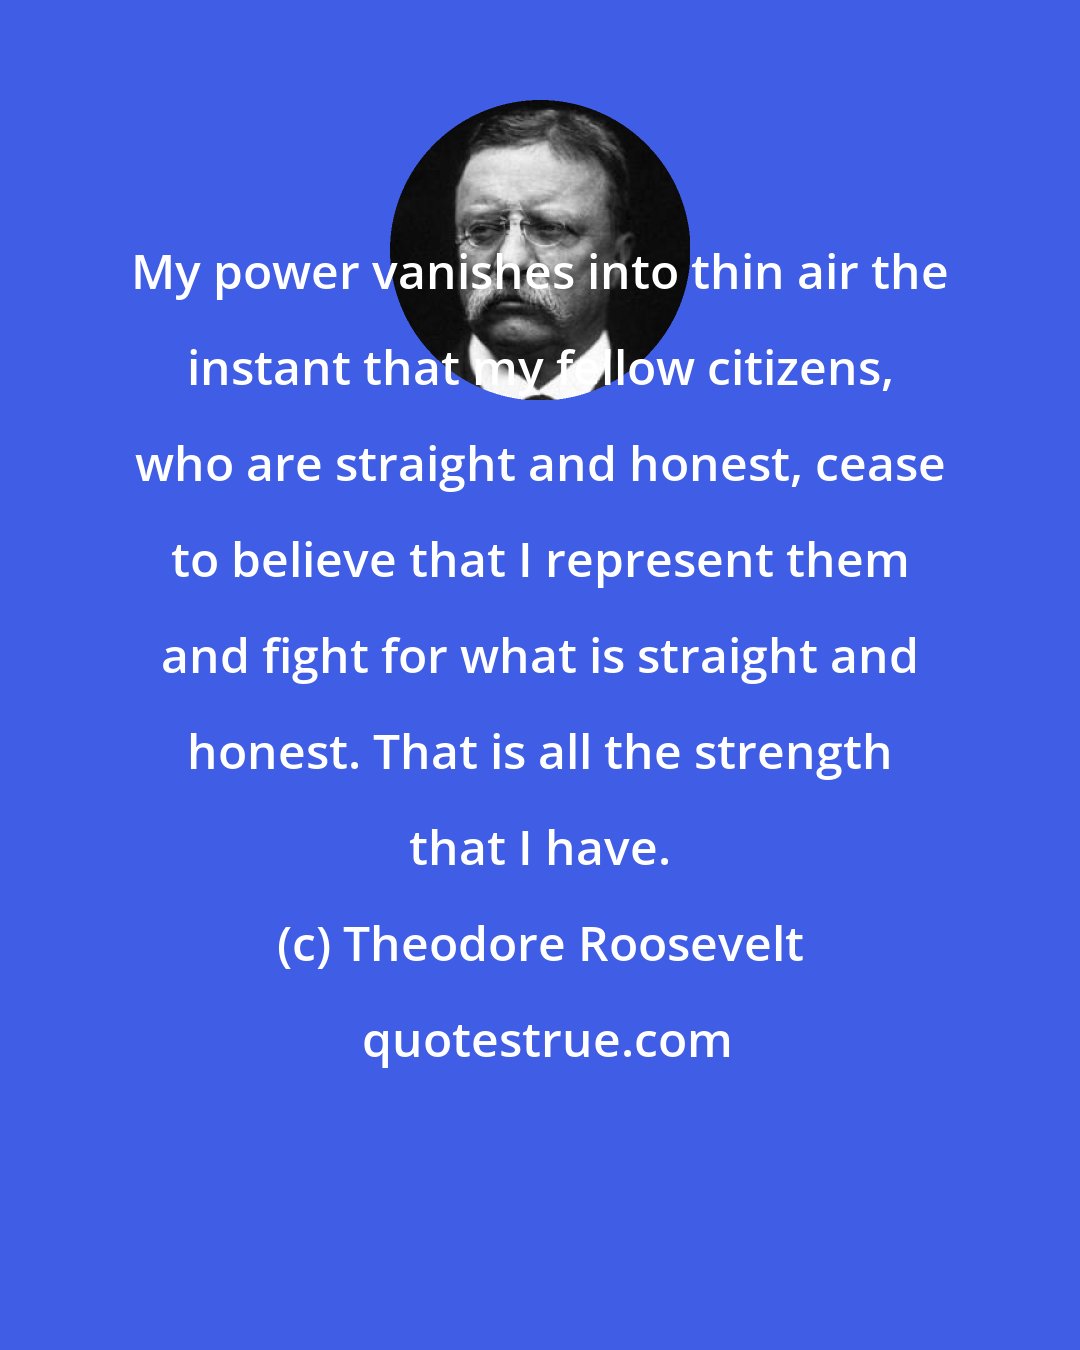 Theodore Roosevelt: My power vanishes into thin air the instant that my fellow citizens, who are straight and honest, cease to believe that I represent them and fight for what is straight and honest. That is all the strength that I have.